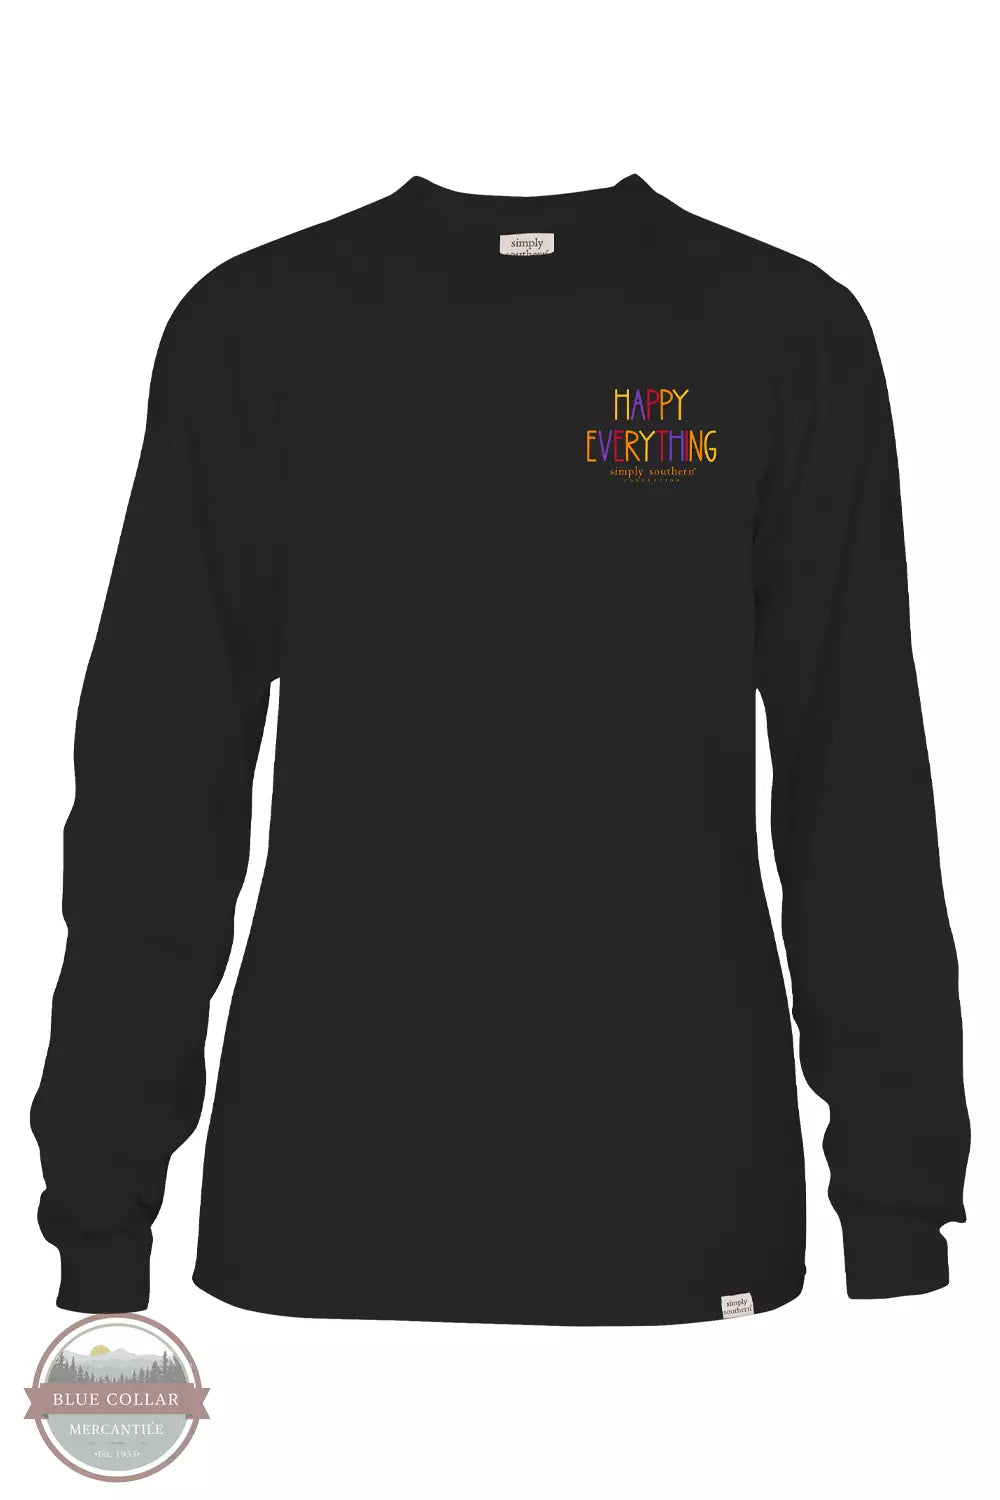 Simply Southern LS-HAPPY-BLACK Happy Hallo-Thanks-Mas Long Sleeve T-Shirt in Black Front View